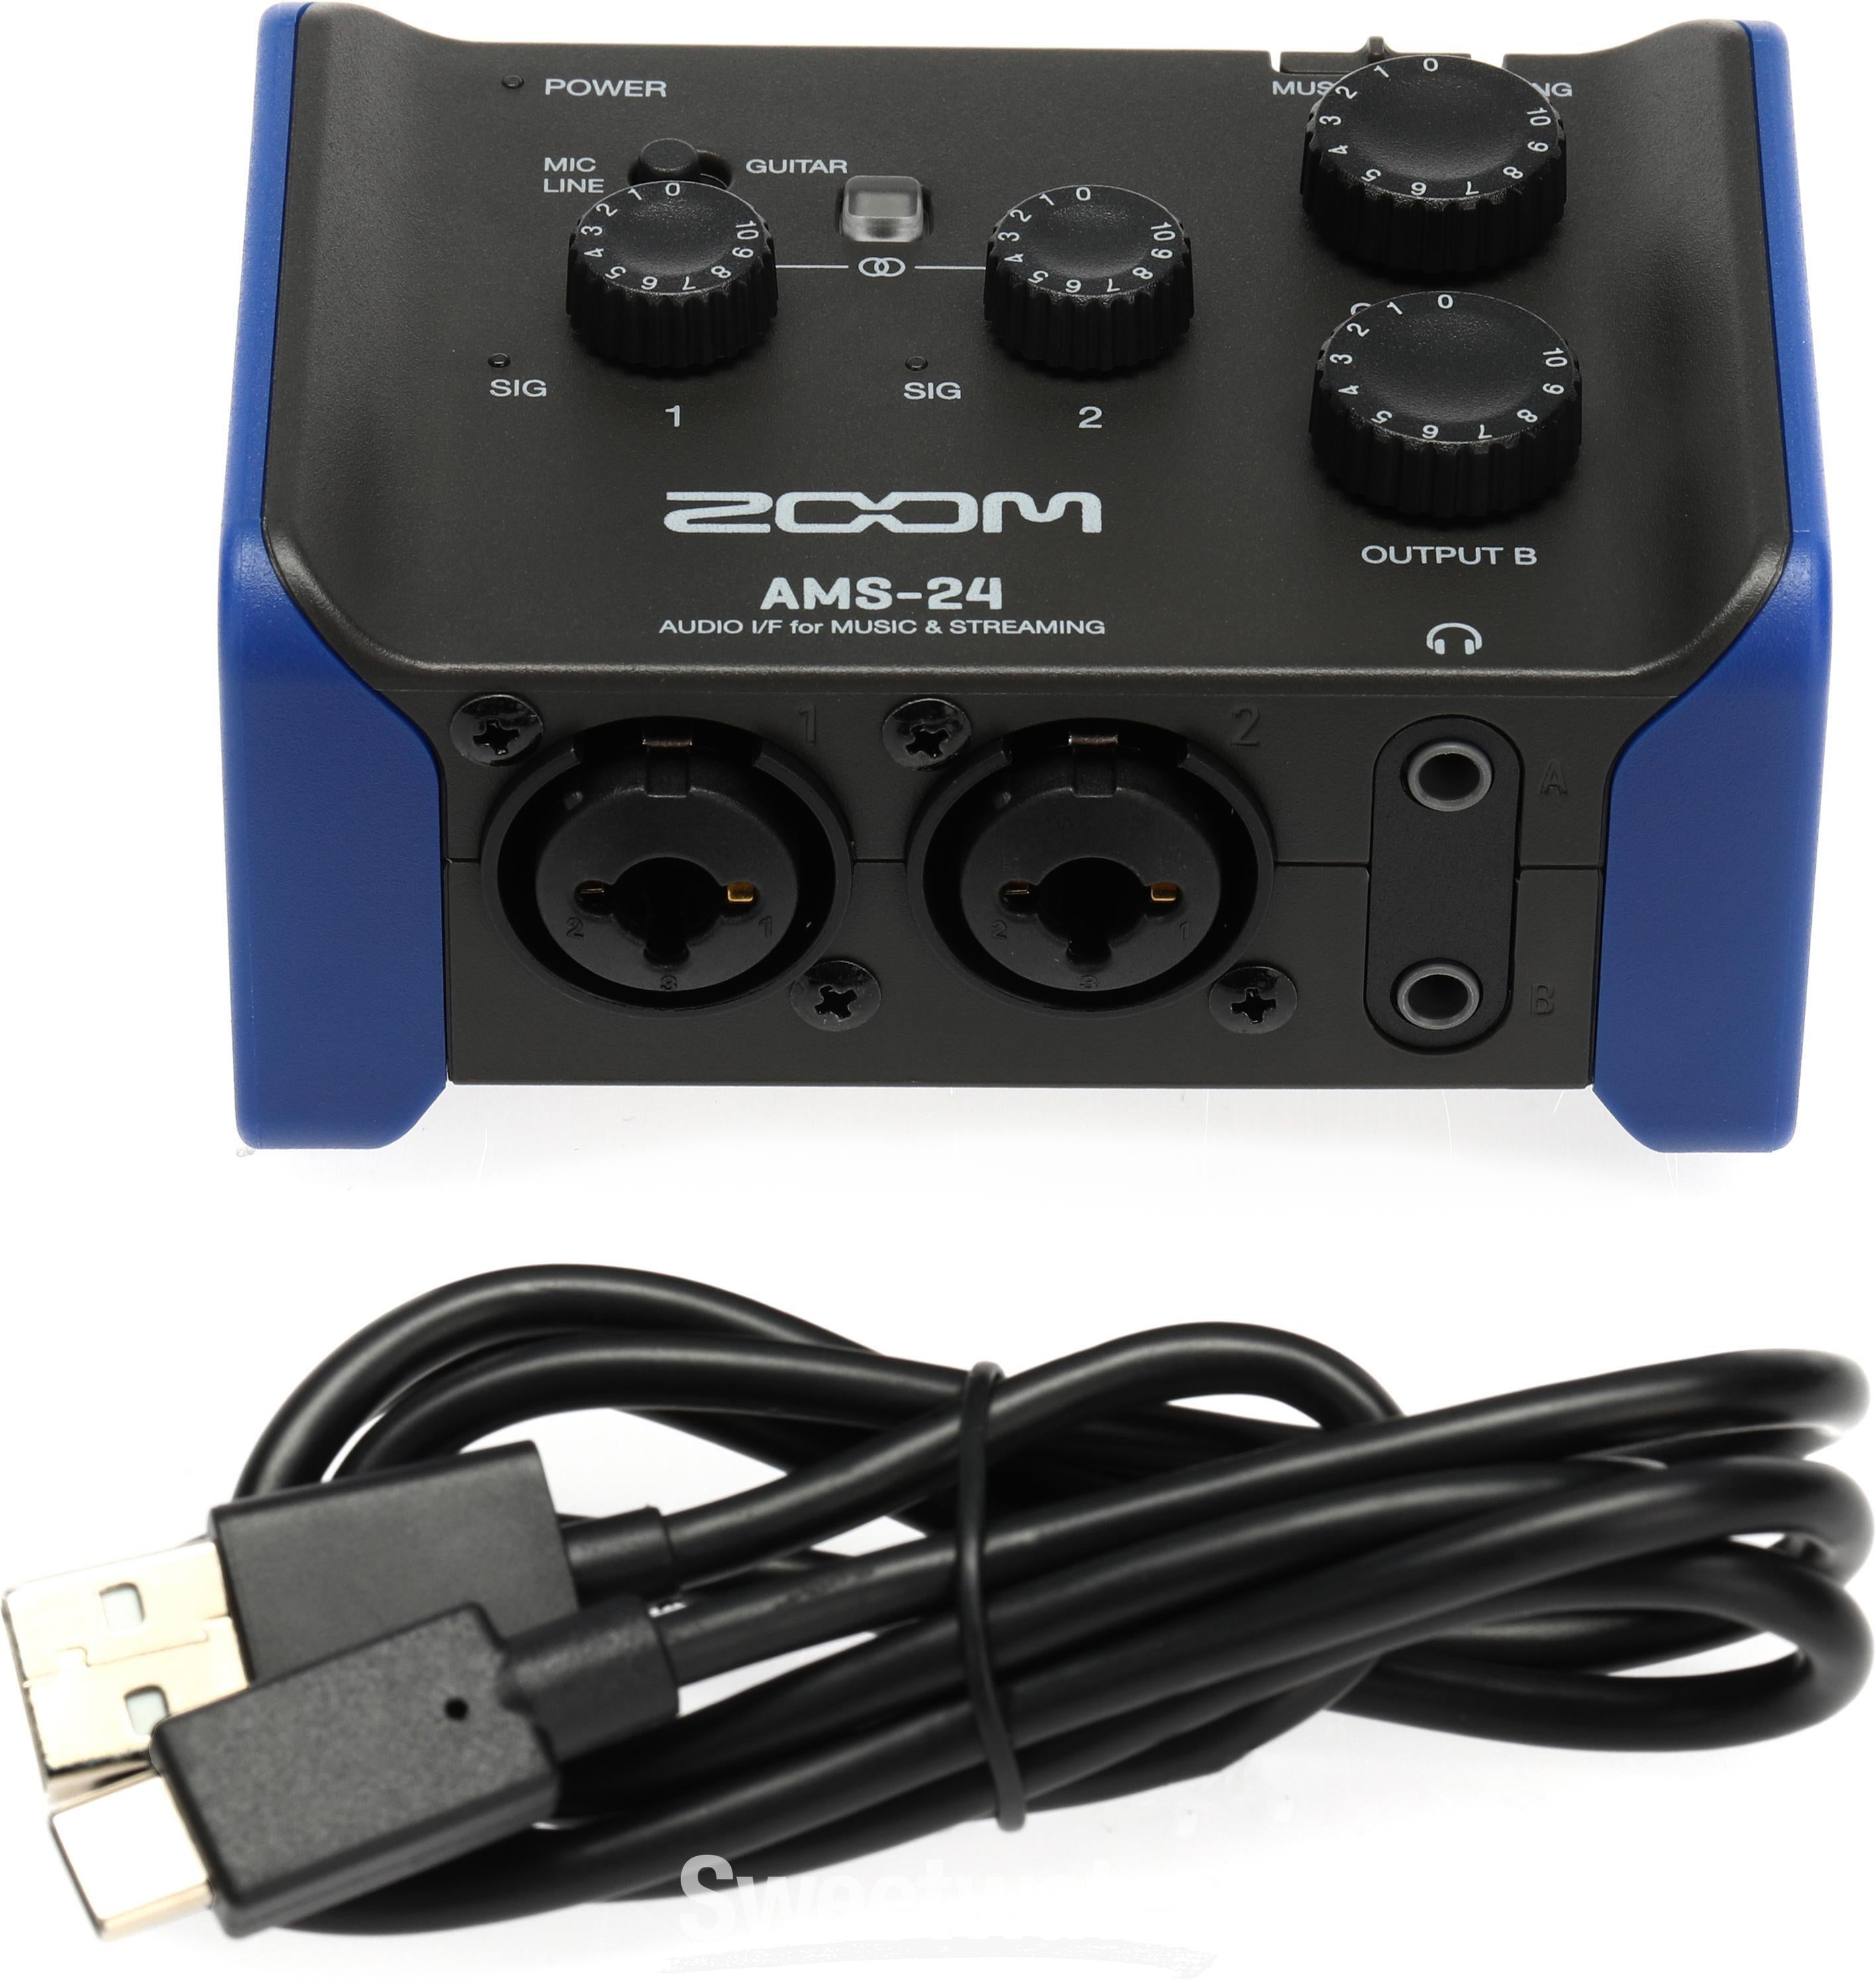 Zoom AMS-24 Audio Interface | Sweetwater